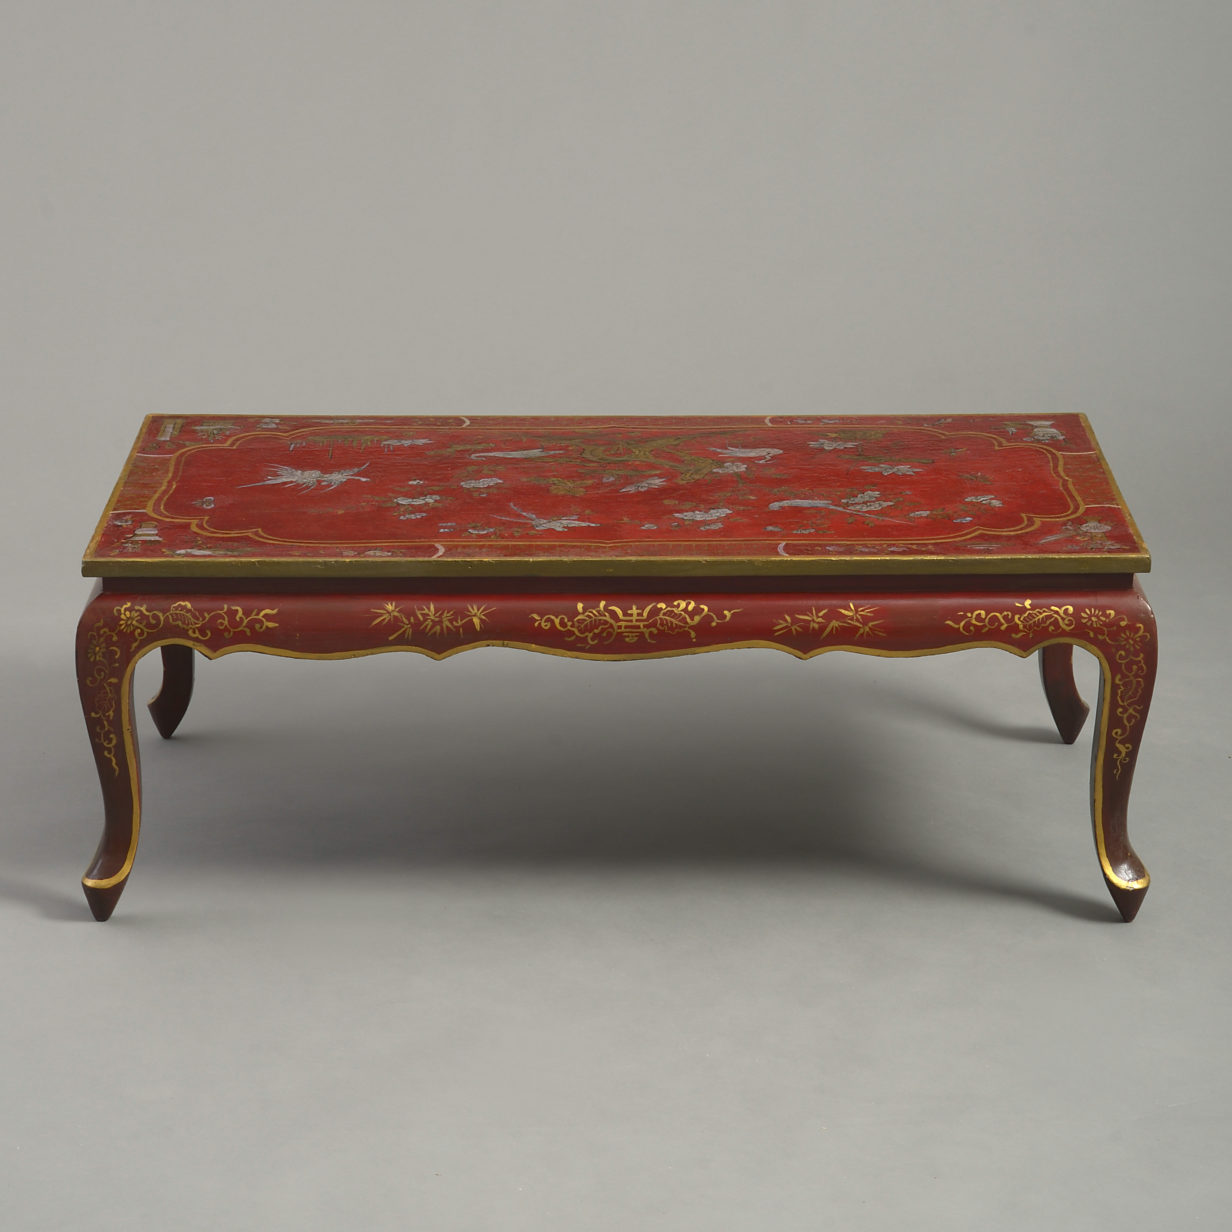 Early 20th century red lacquer low coffee table